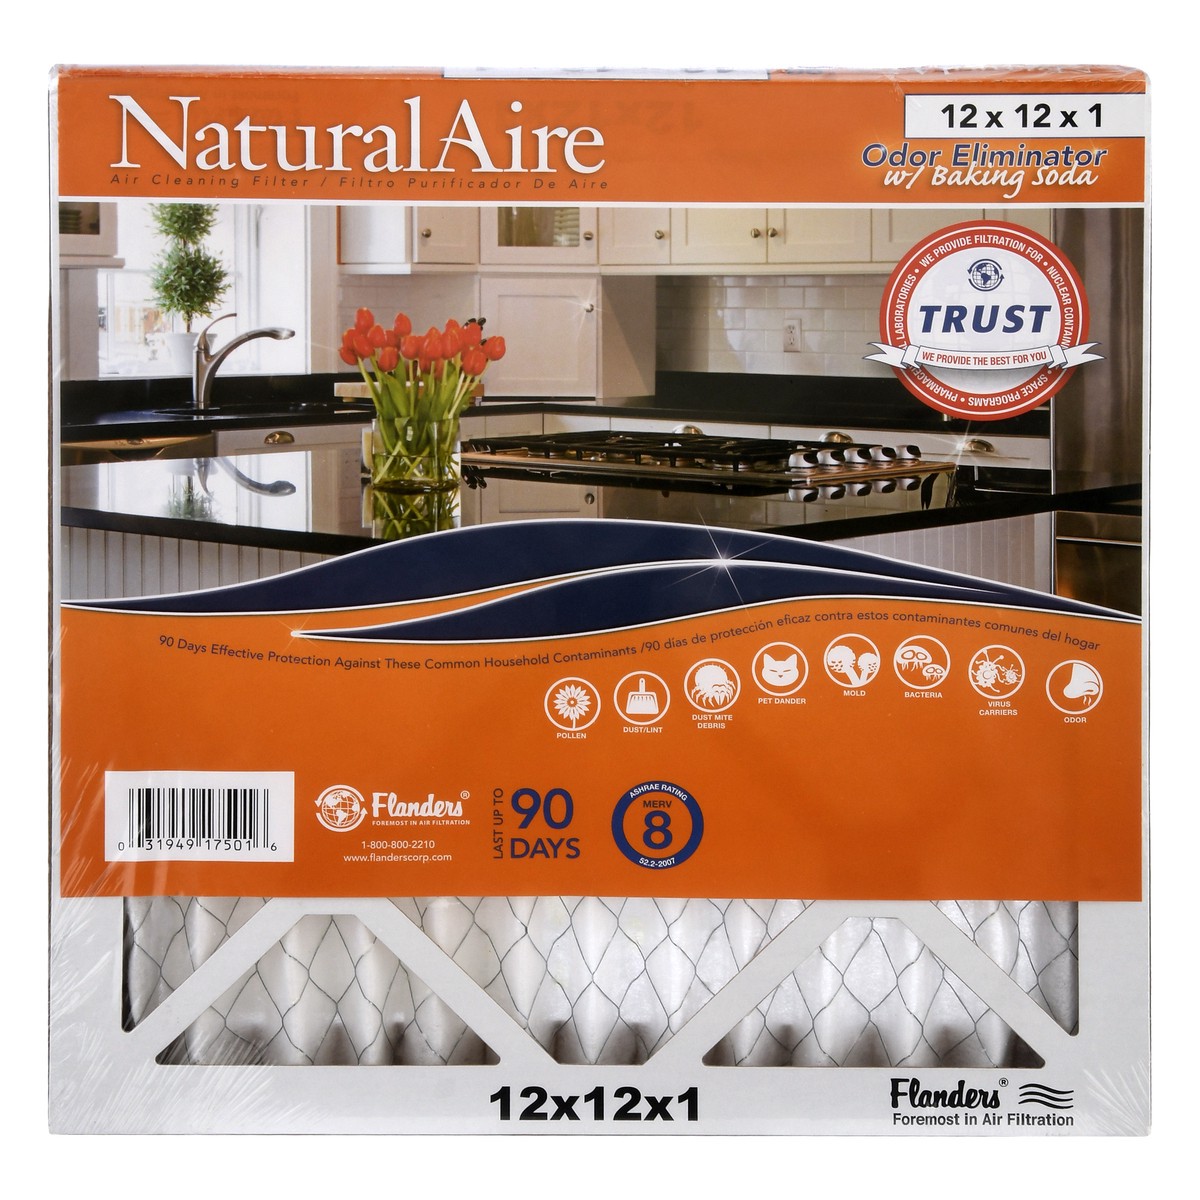 slide 1 of 11, NaturalAire 12" x 12" x 1" Air Cleaning Filter Odor Eliminator With Baking Soda, LG